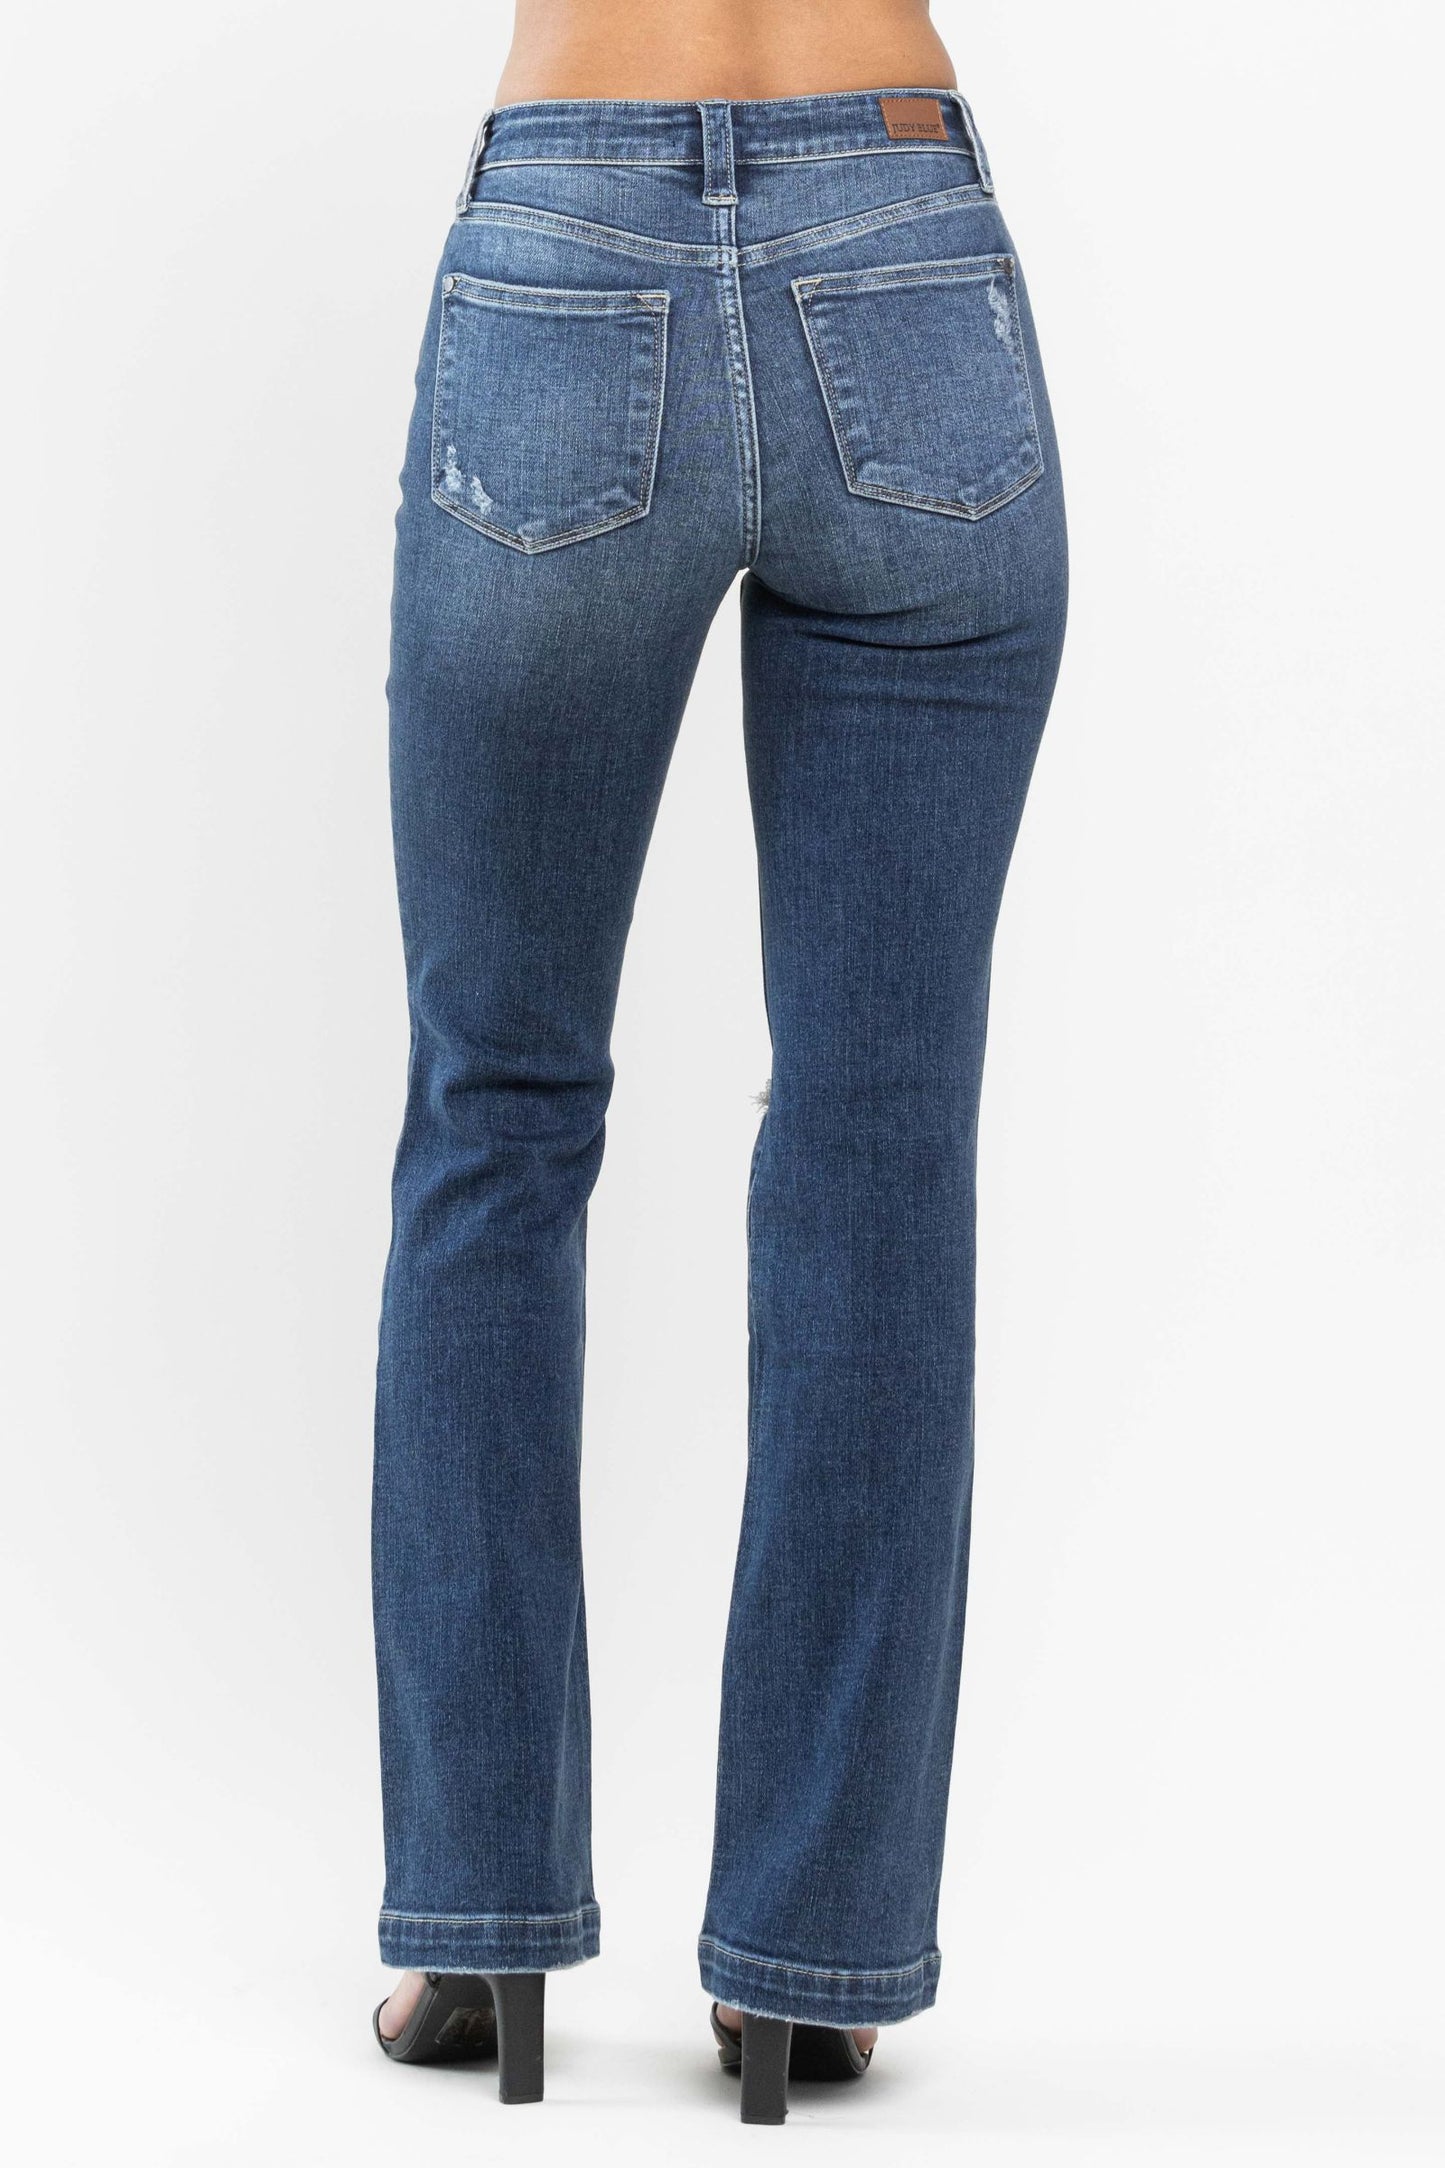 SIZE 5/27 Judy Blue Cameron Mid-Rise Distressed Bootcut Jeans (JB 82541)